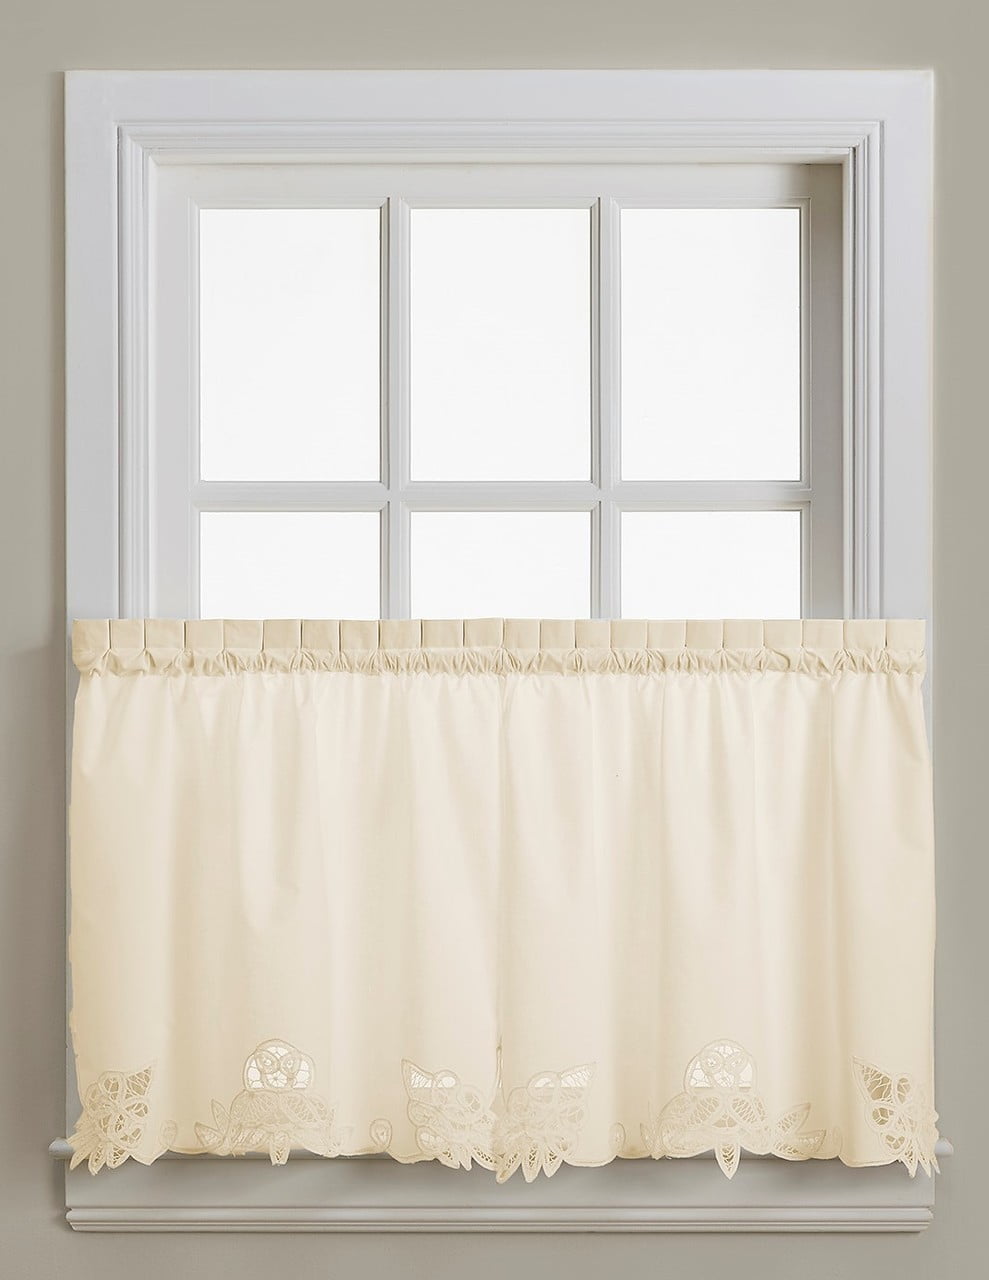 Details about   LACE CURTAIN CAFE/TIER VALANCE LOVEBIRDS DESIGN 24" DROP WIDTH SOLD BY THE YARD 